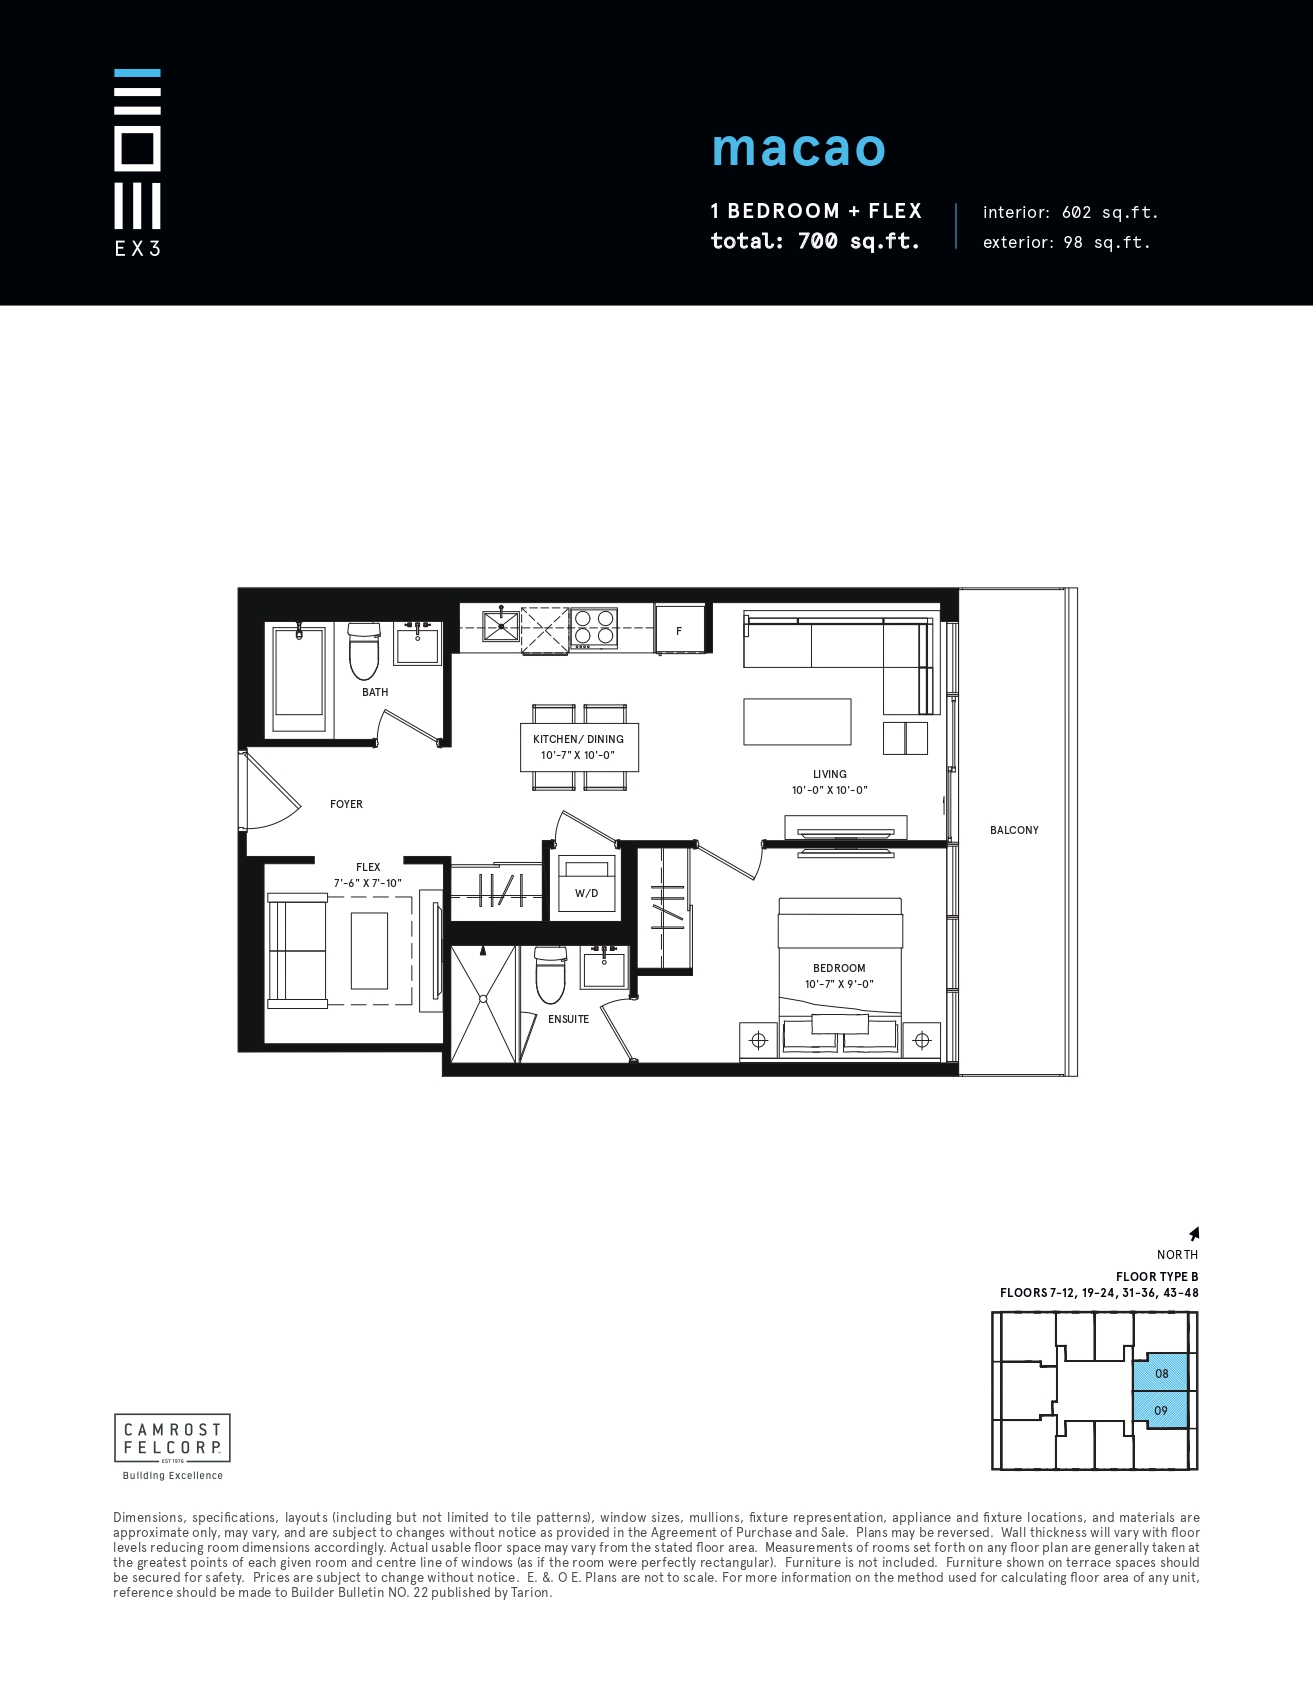  Floor Plan of Exchange District Condos - Phase 3 with undefined beds